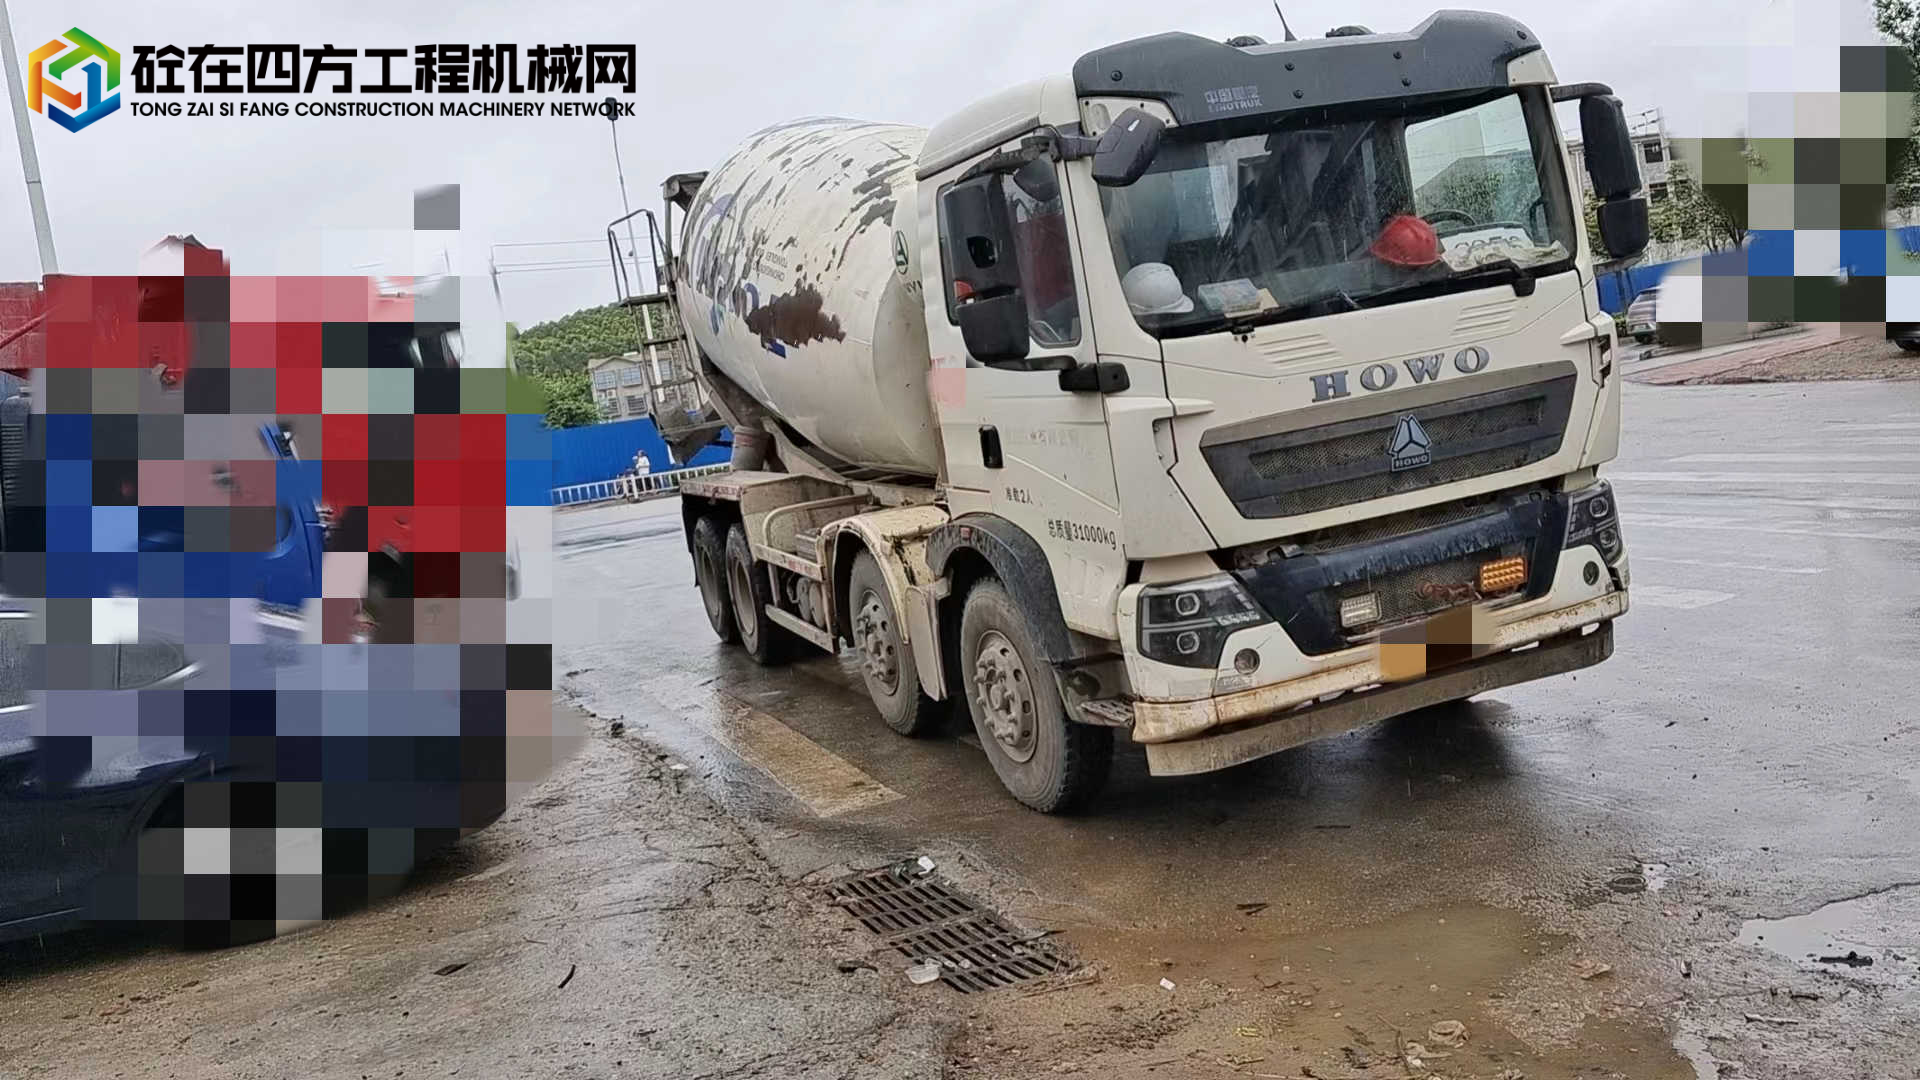 https://images.tongzsf.com/tong/truck_machine/20231107/16549bed60a4c3.jpg